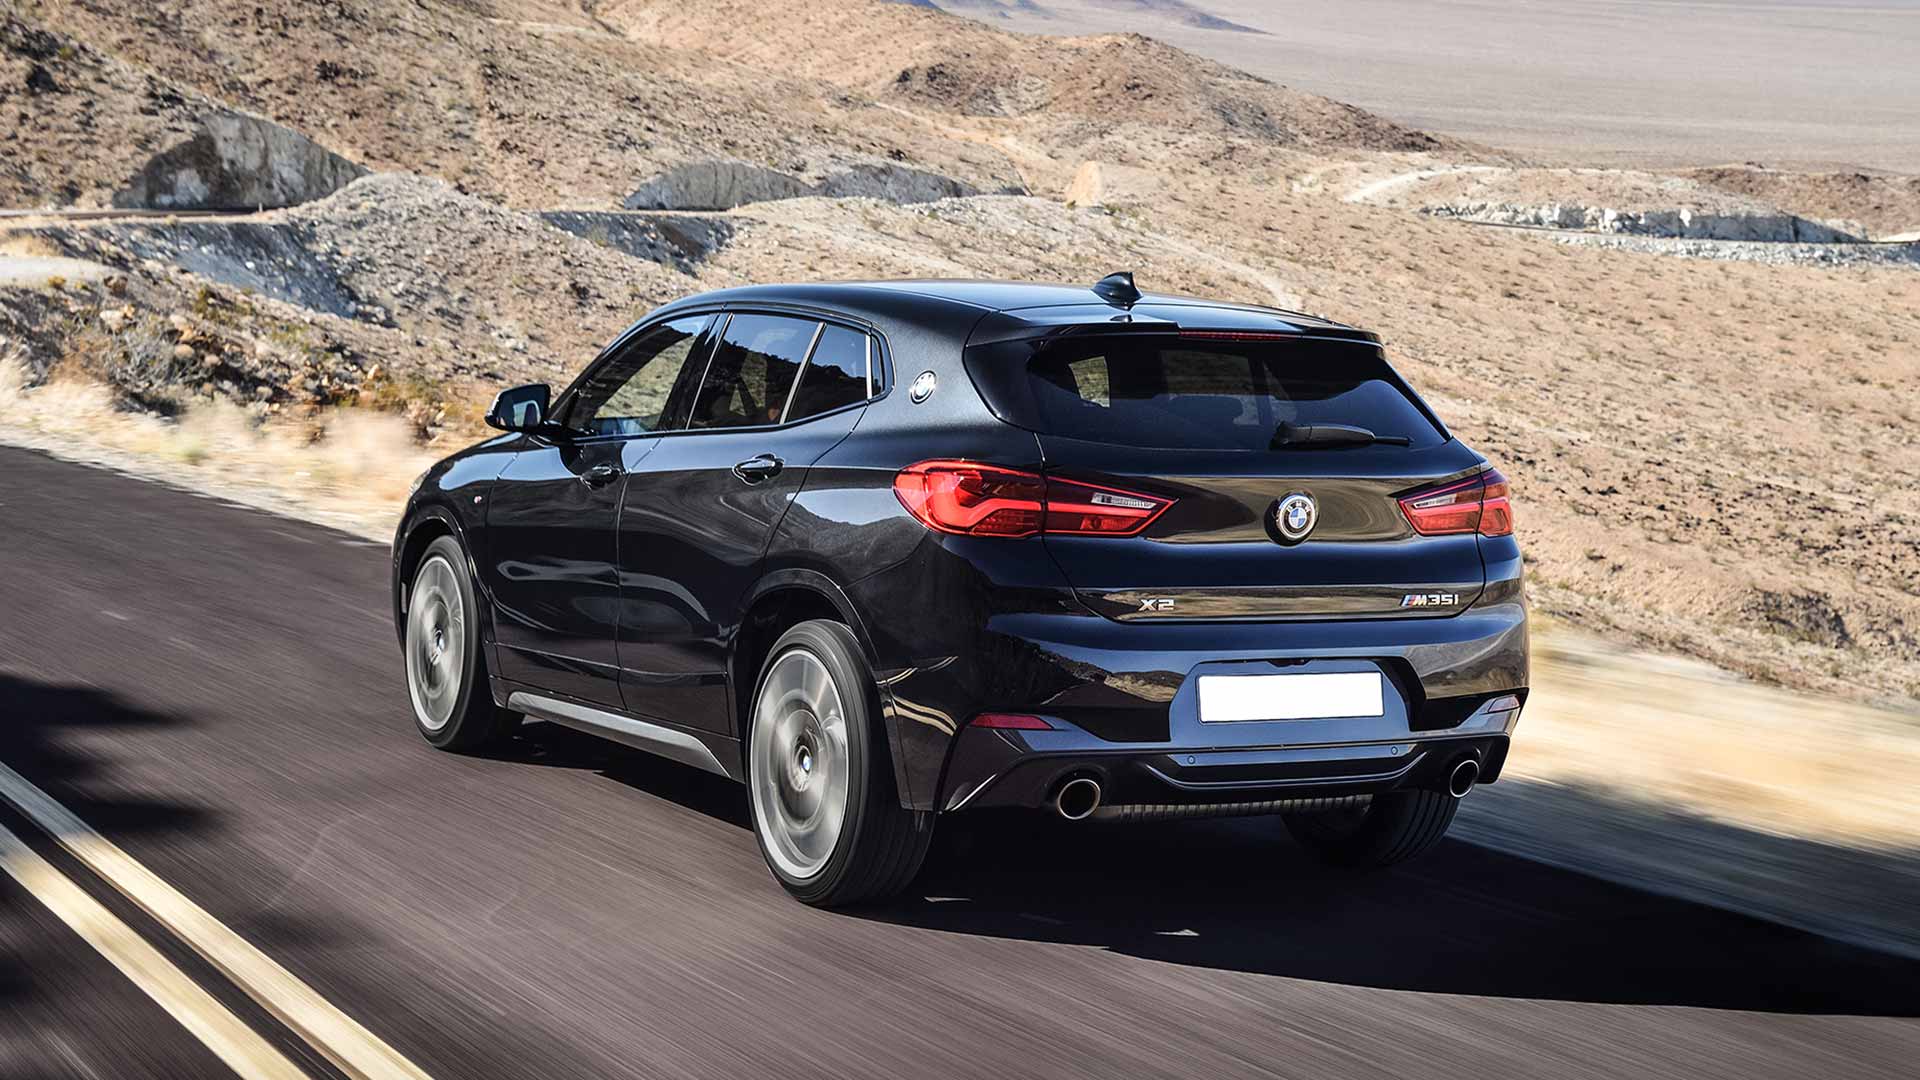 BMW X2 review - Motoring Research